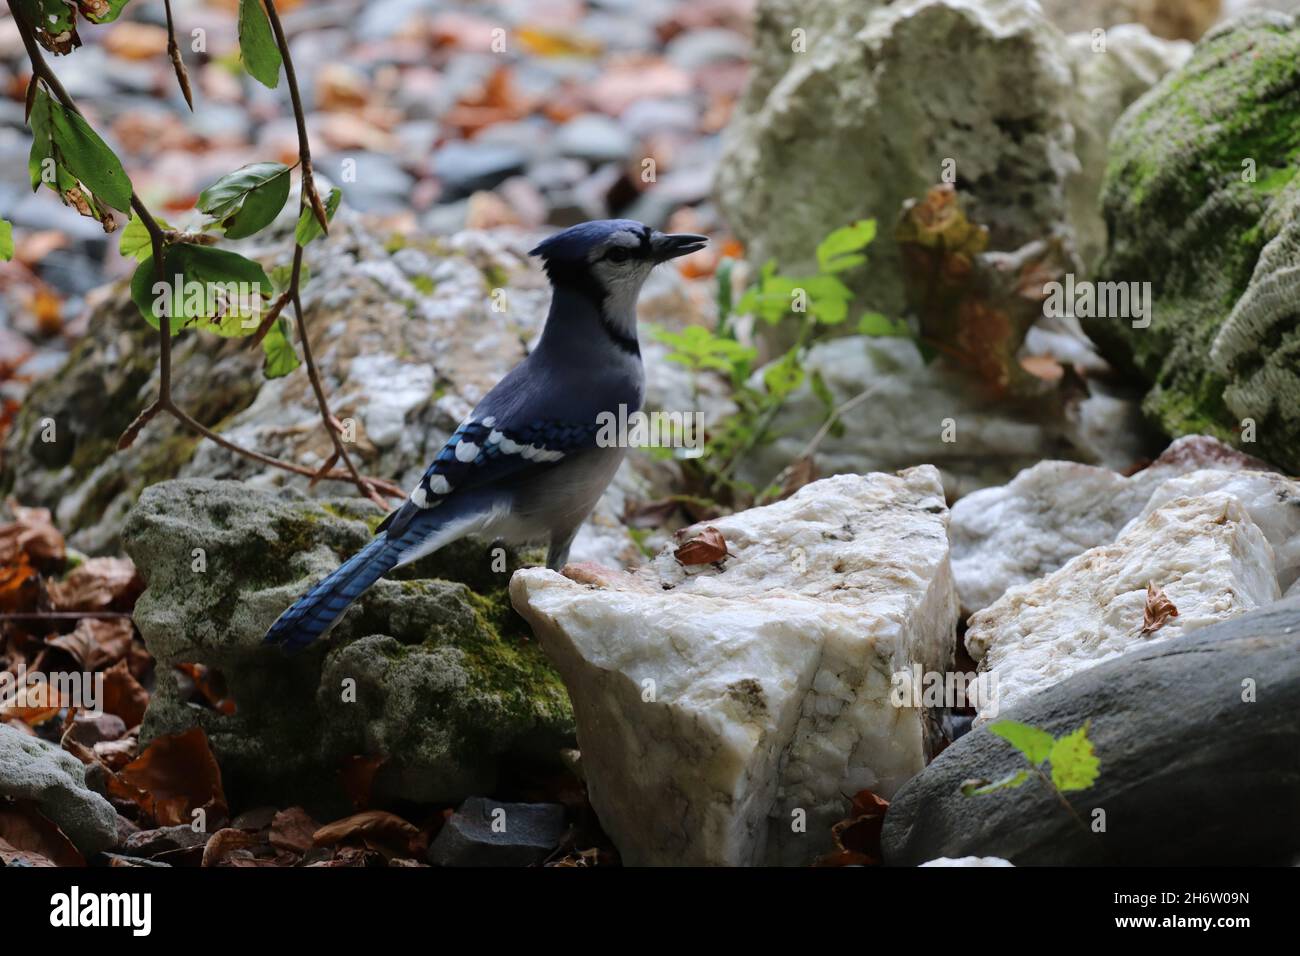 Closeup shot of a blue jay perched on a rock in Halifax, Germany Stock Photo